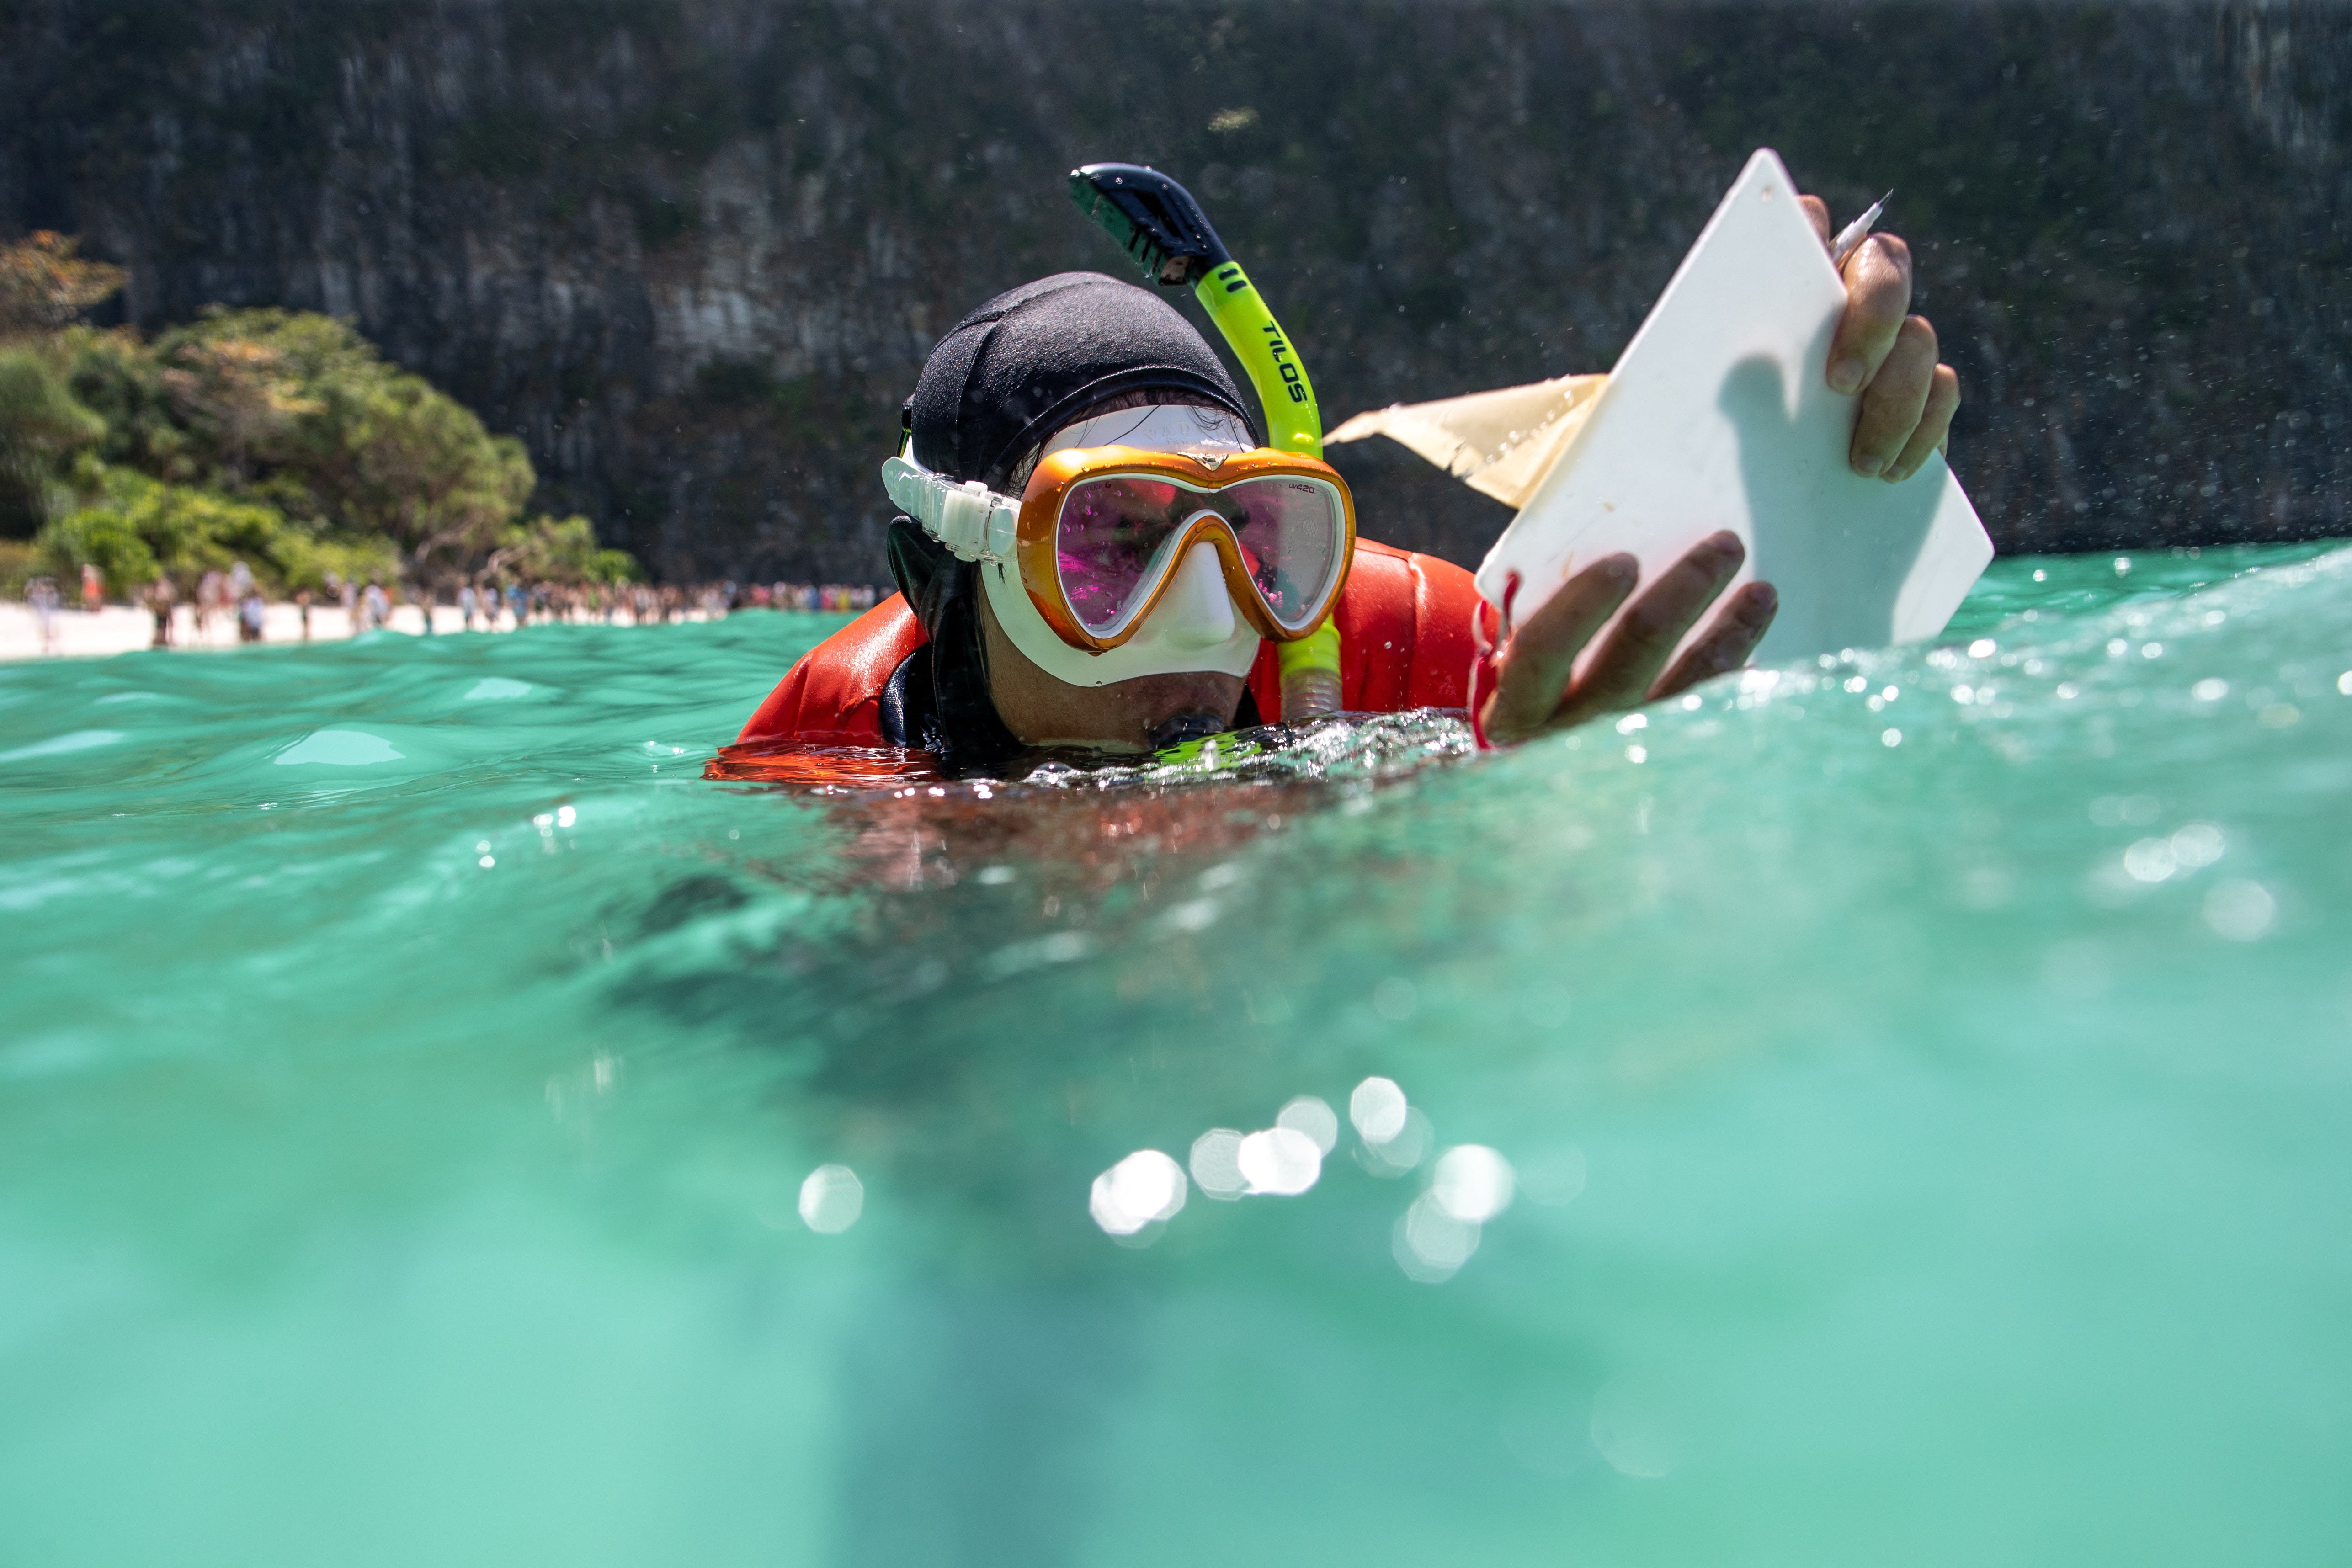 Sommawan Kasa, 29, a divemaster with the Maya Shark Watch Project, takes notes on a waterproof filming board